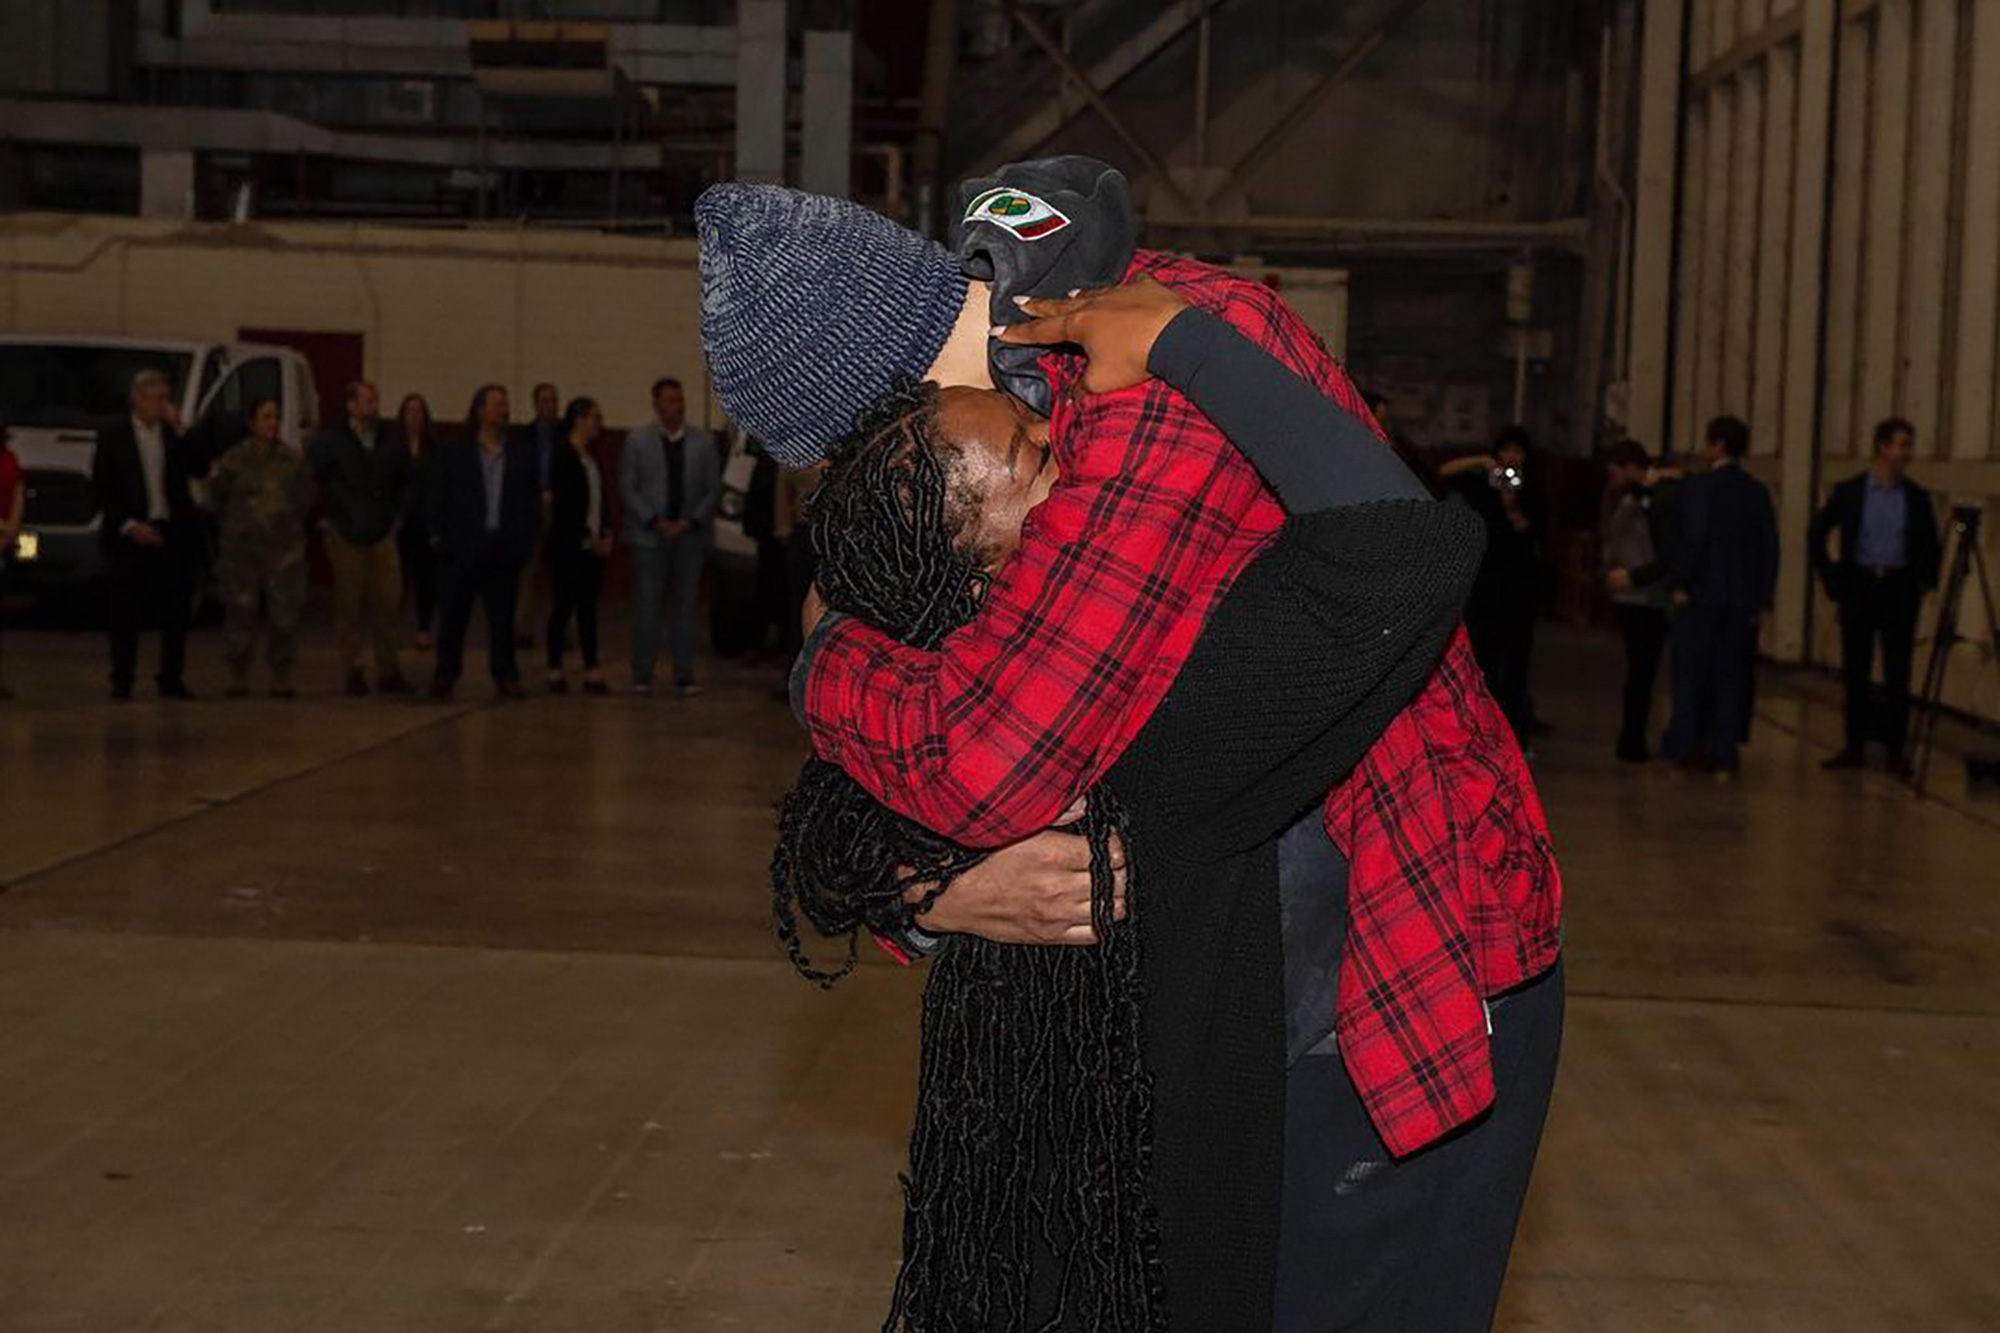 Brittney Griner hugs her wife Cherelle after arriving at Joint Base San Antonio-Lackland in San Antonio, Texas, on December 9.